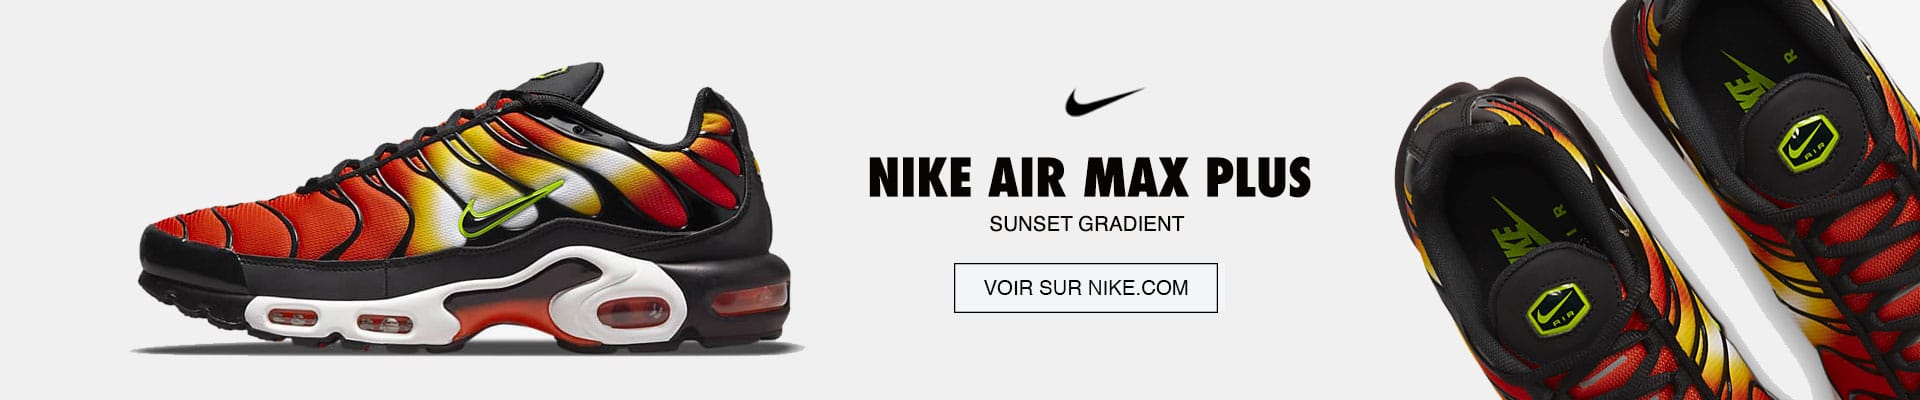 nike air stab 2015 2017 free full form software